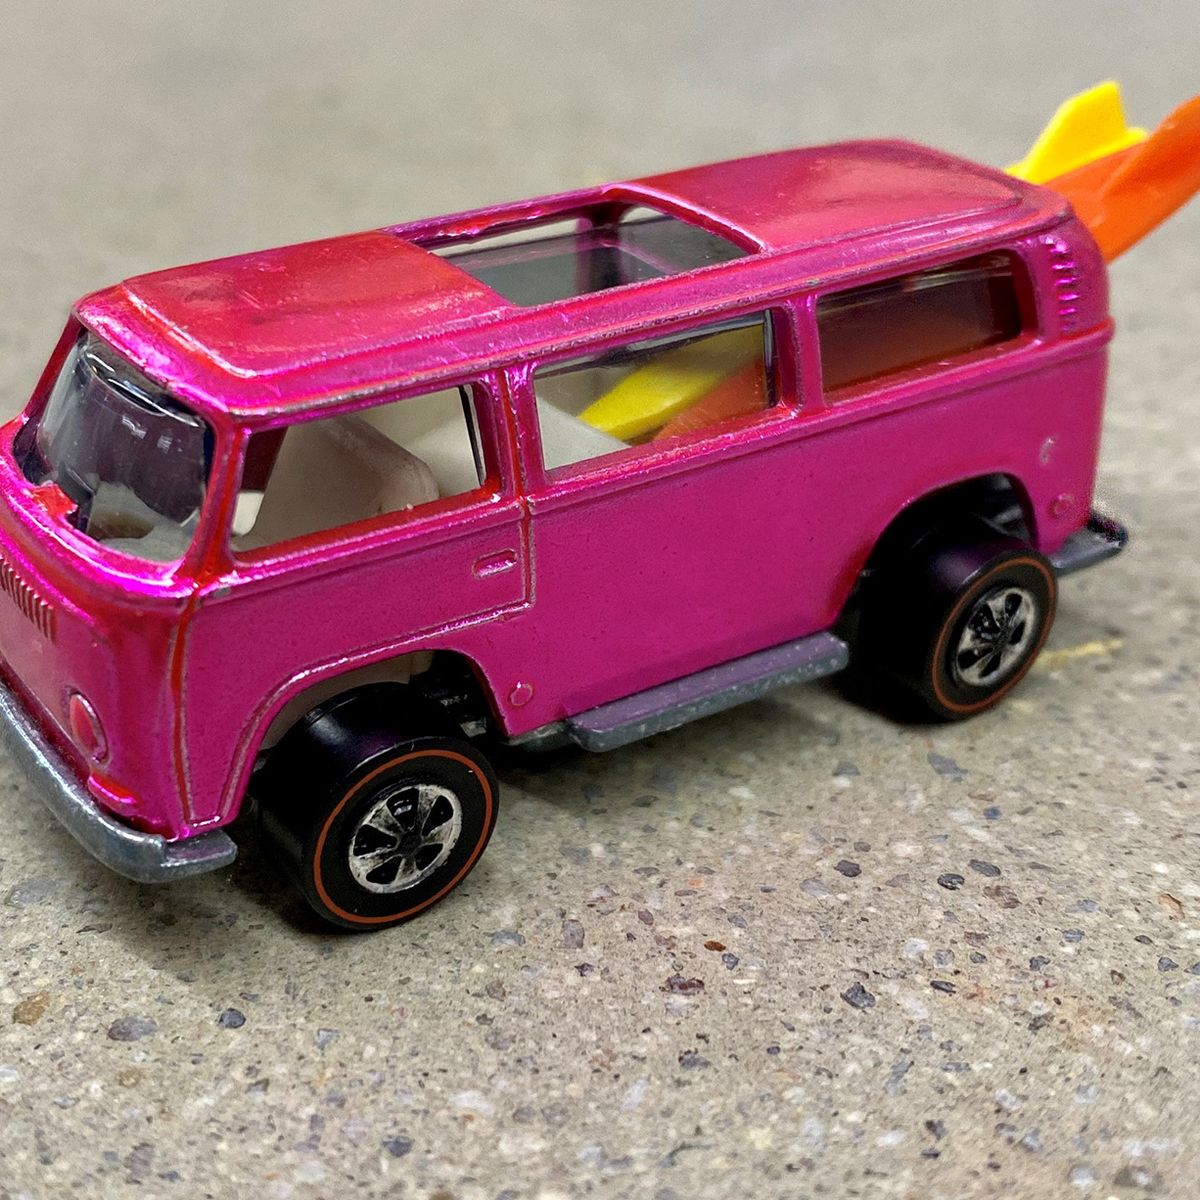 Hot Wheels Color Reveal toy vehicle - Imagine That Toys